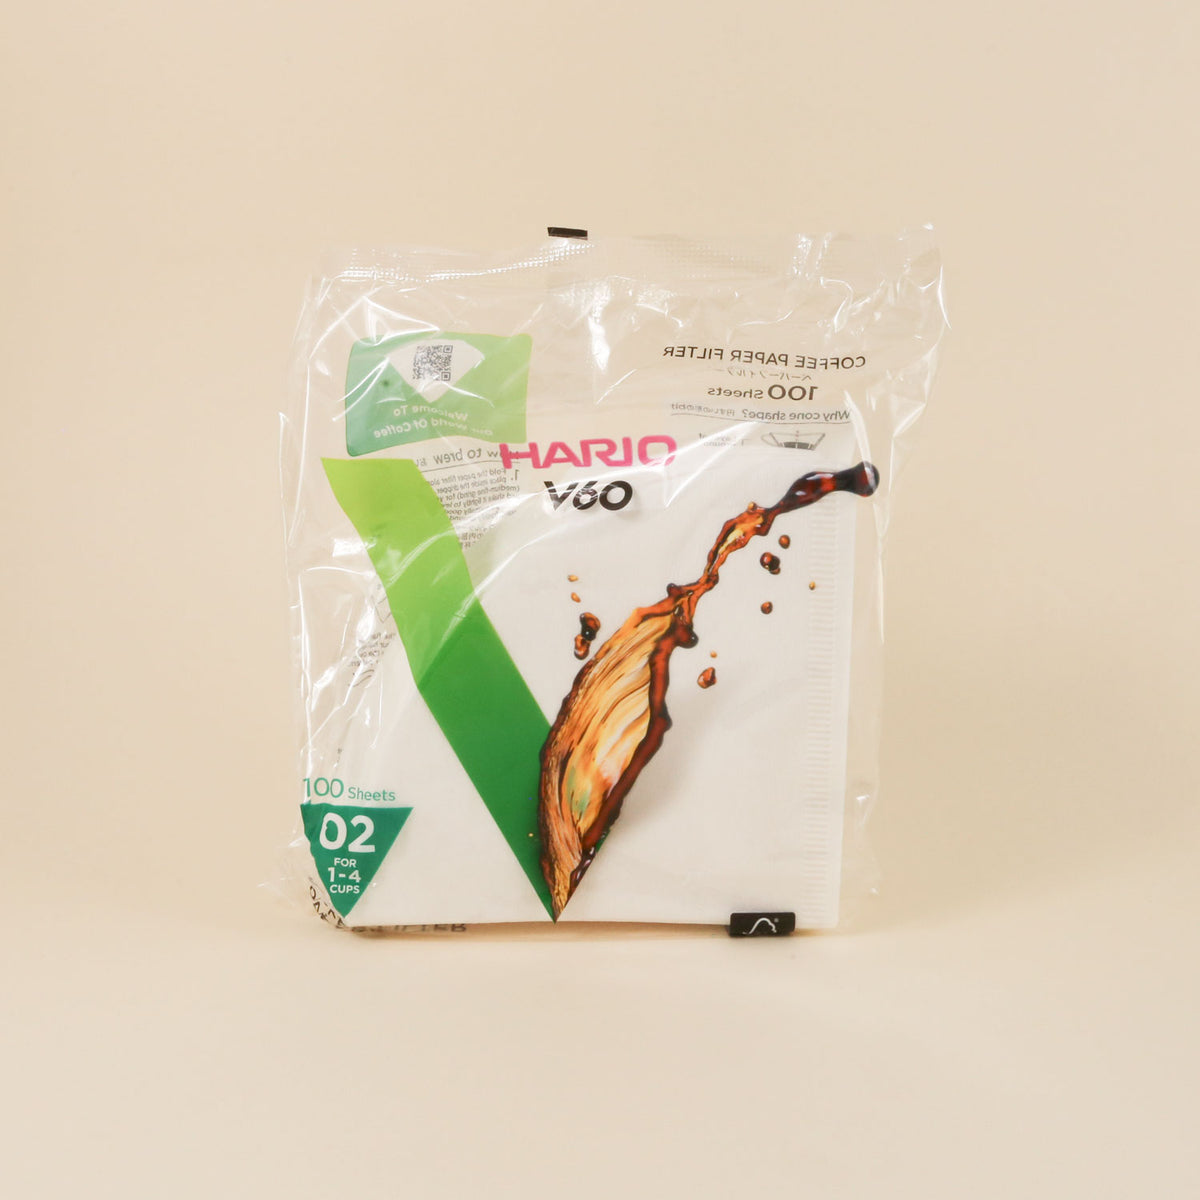 A sealed pack of Hario V60 Dripper Filters, size 02 for 100 sheets, with a white and green label featuring an image of a coffee splash.